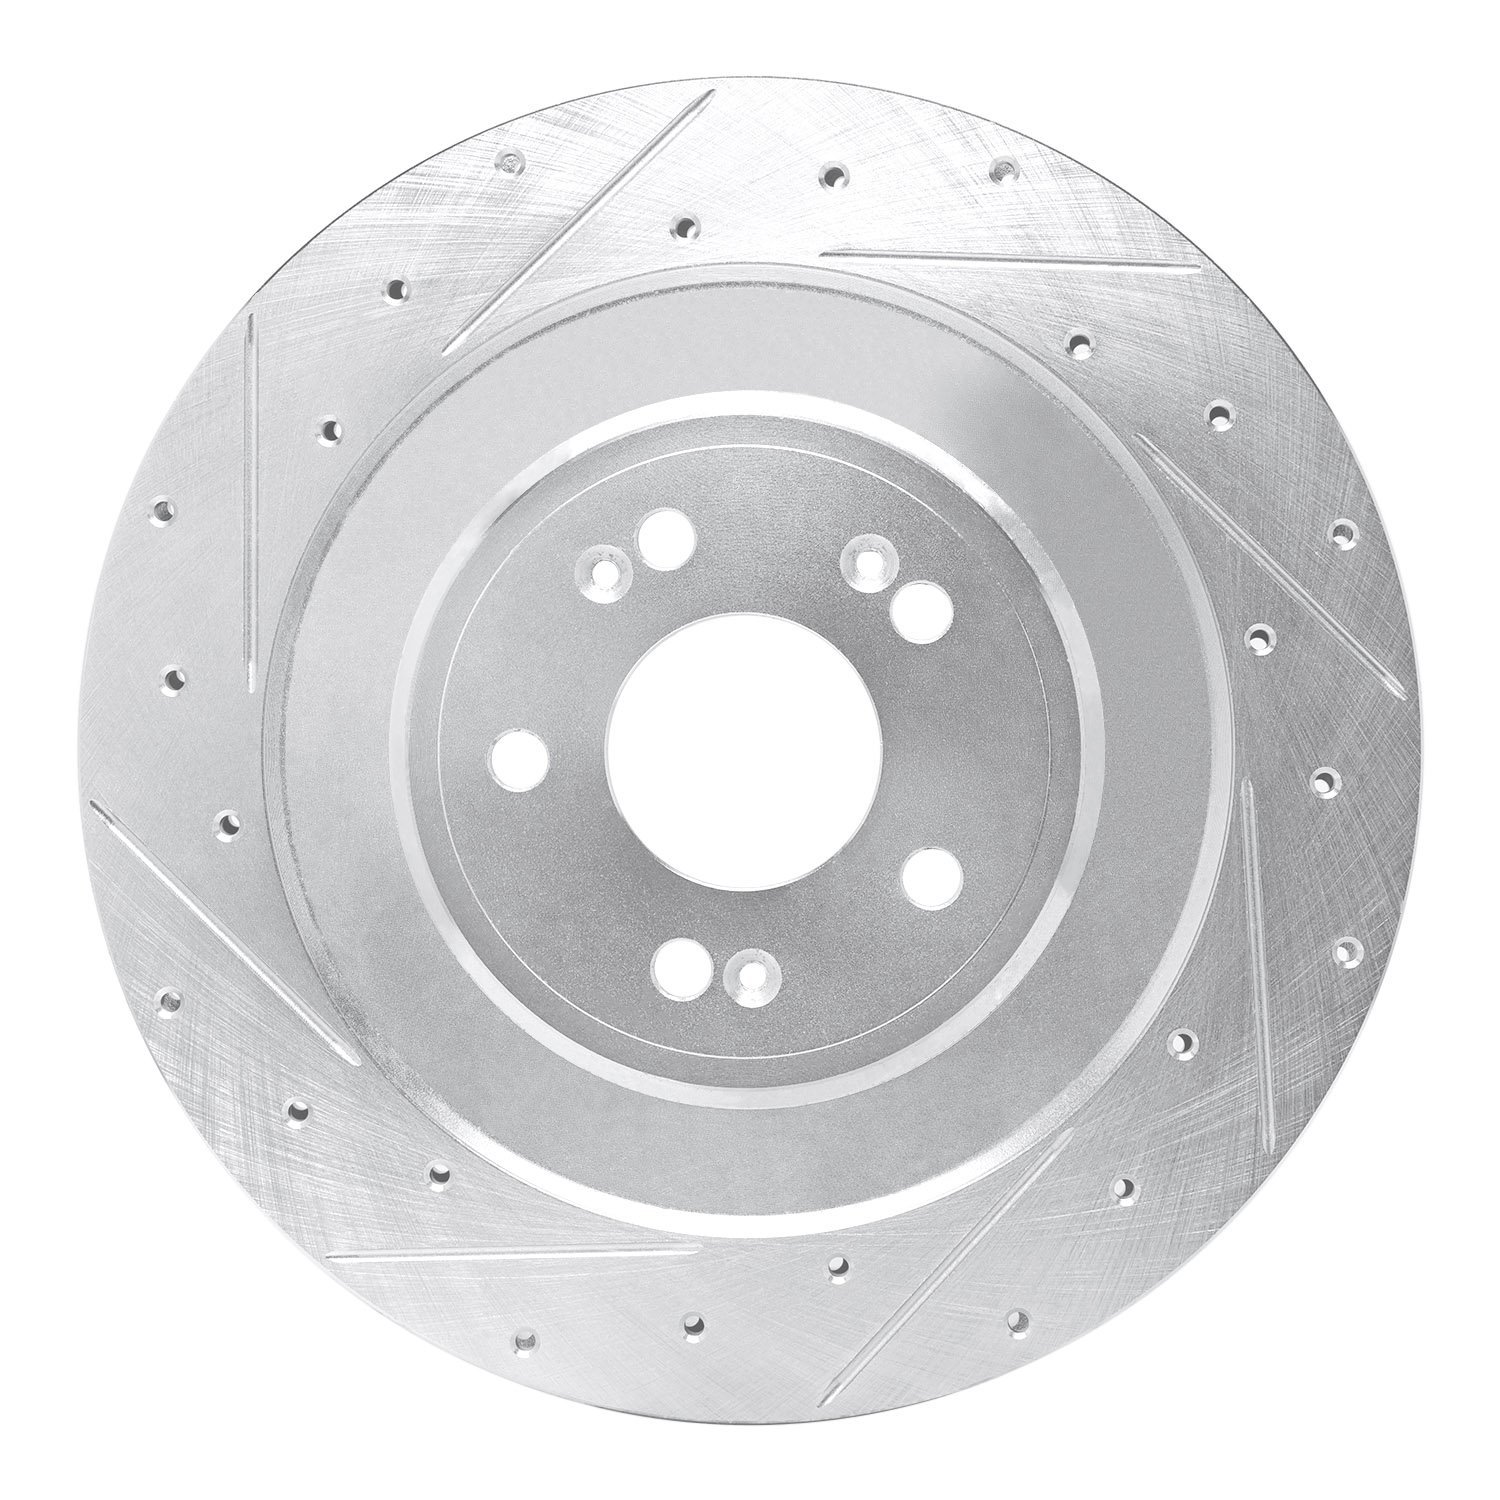 631-10007L Drilled/Slotted Brake Rotor [Silver], Fits Select Kia/Hyundai/Genesis, Position: Rear Left